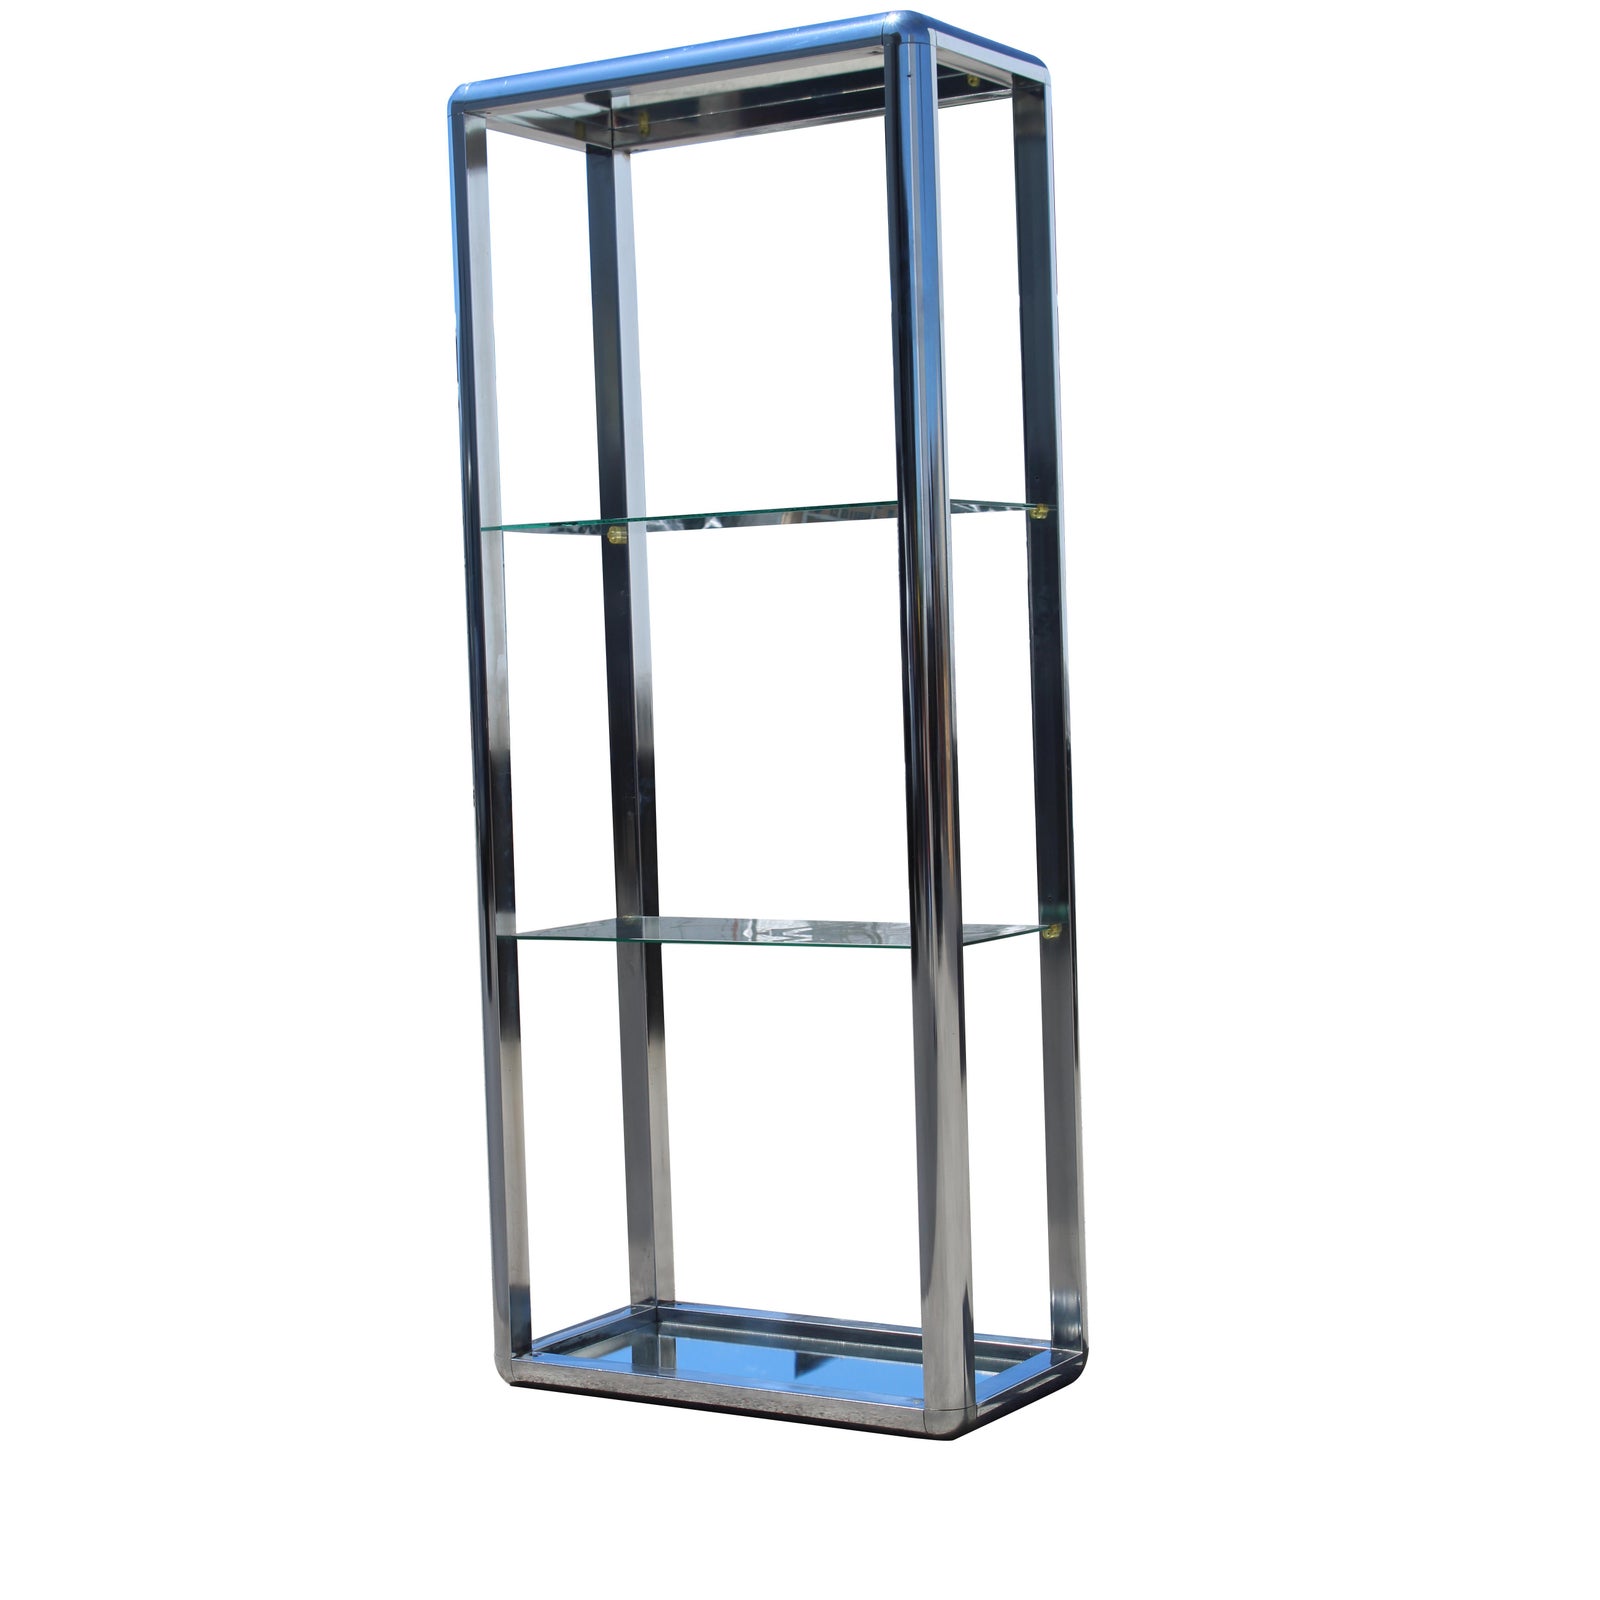 1970s-chrome-mirrored-display-case-stand-4676